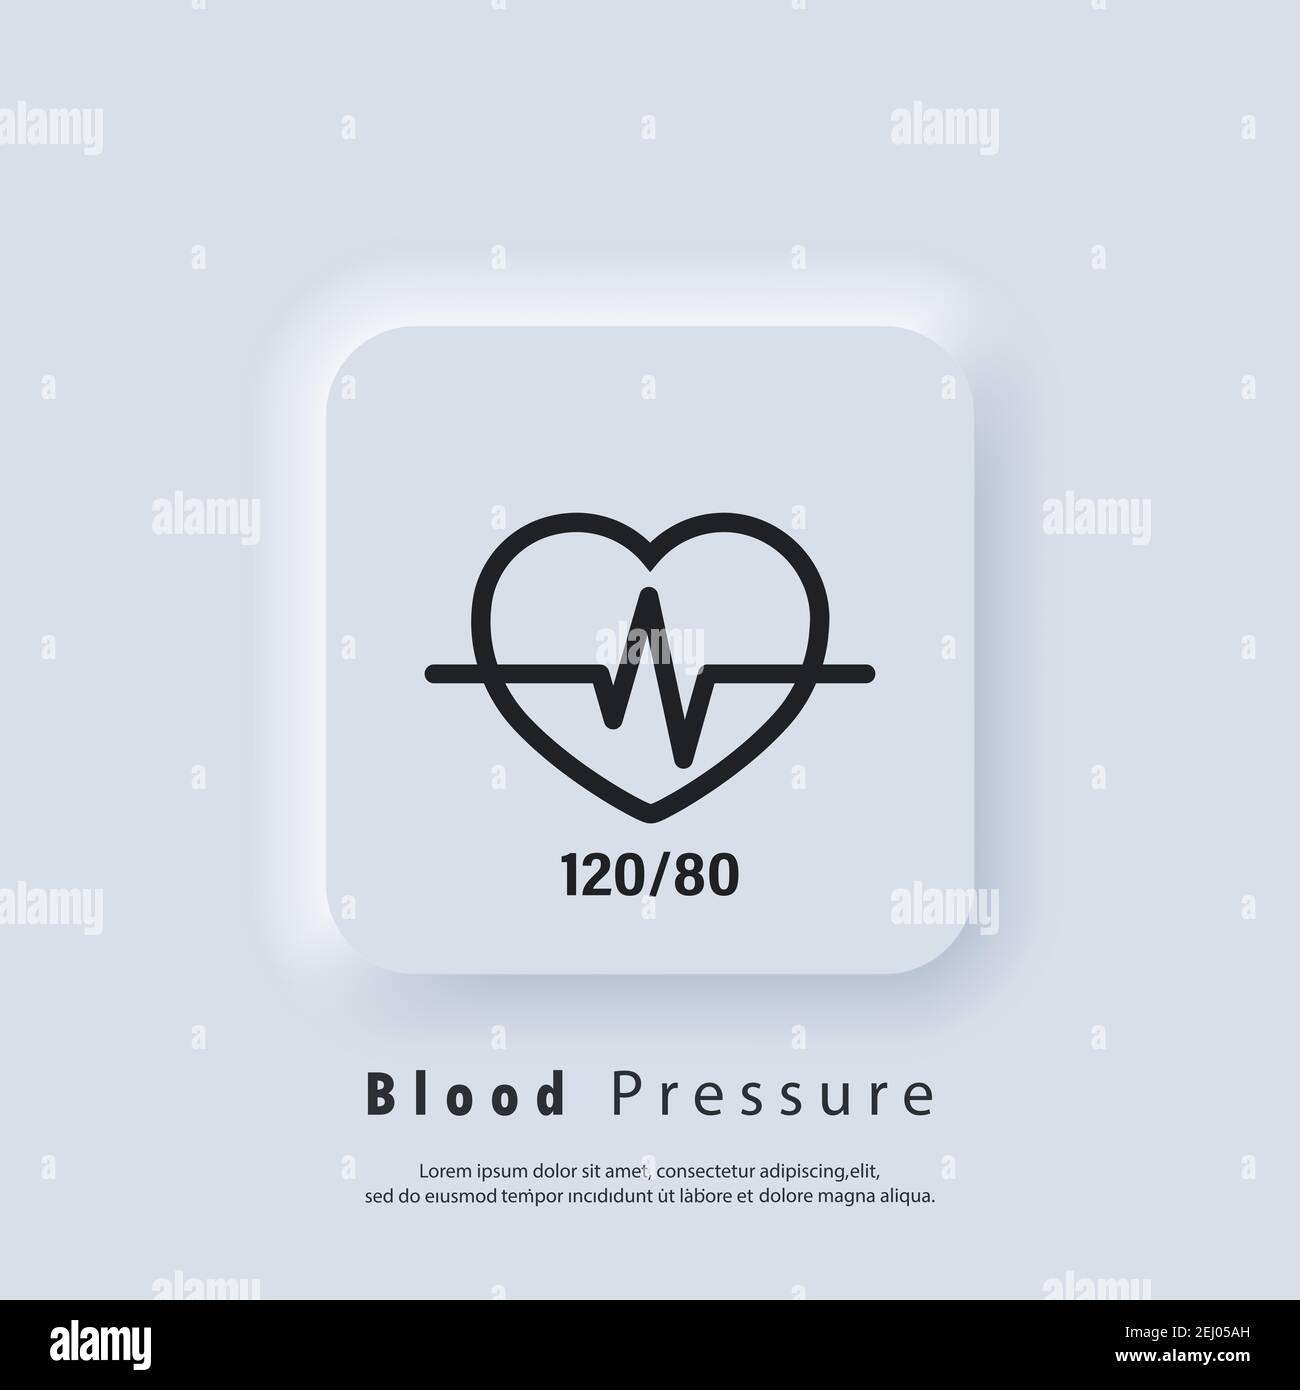 Know your numbers: Blood pressure - Mayo Clinic Health System